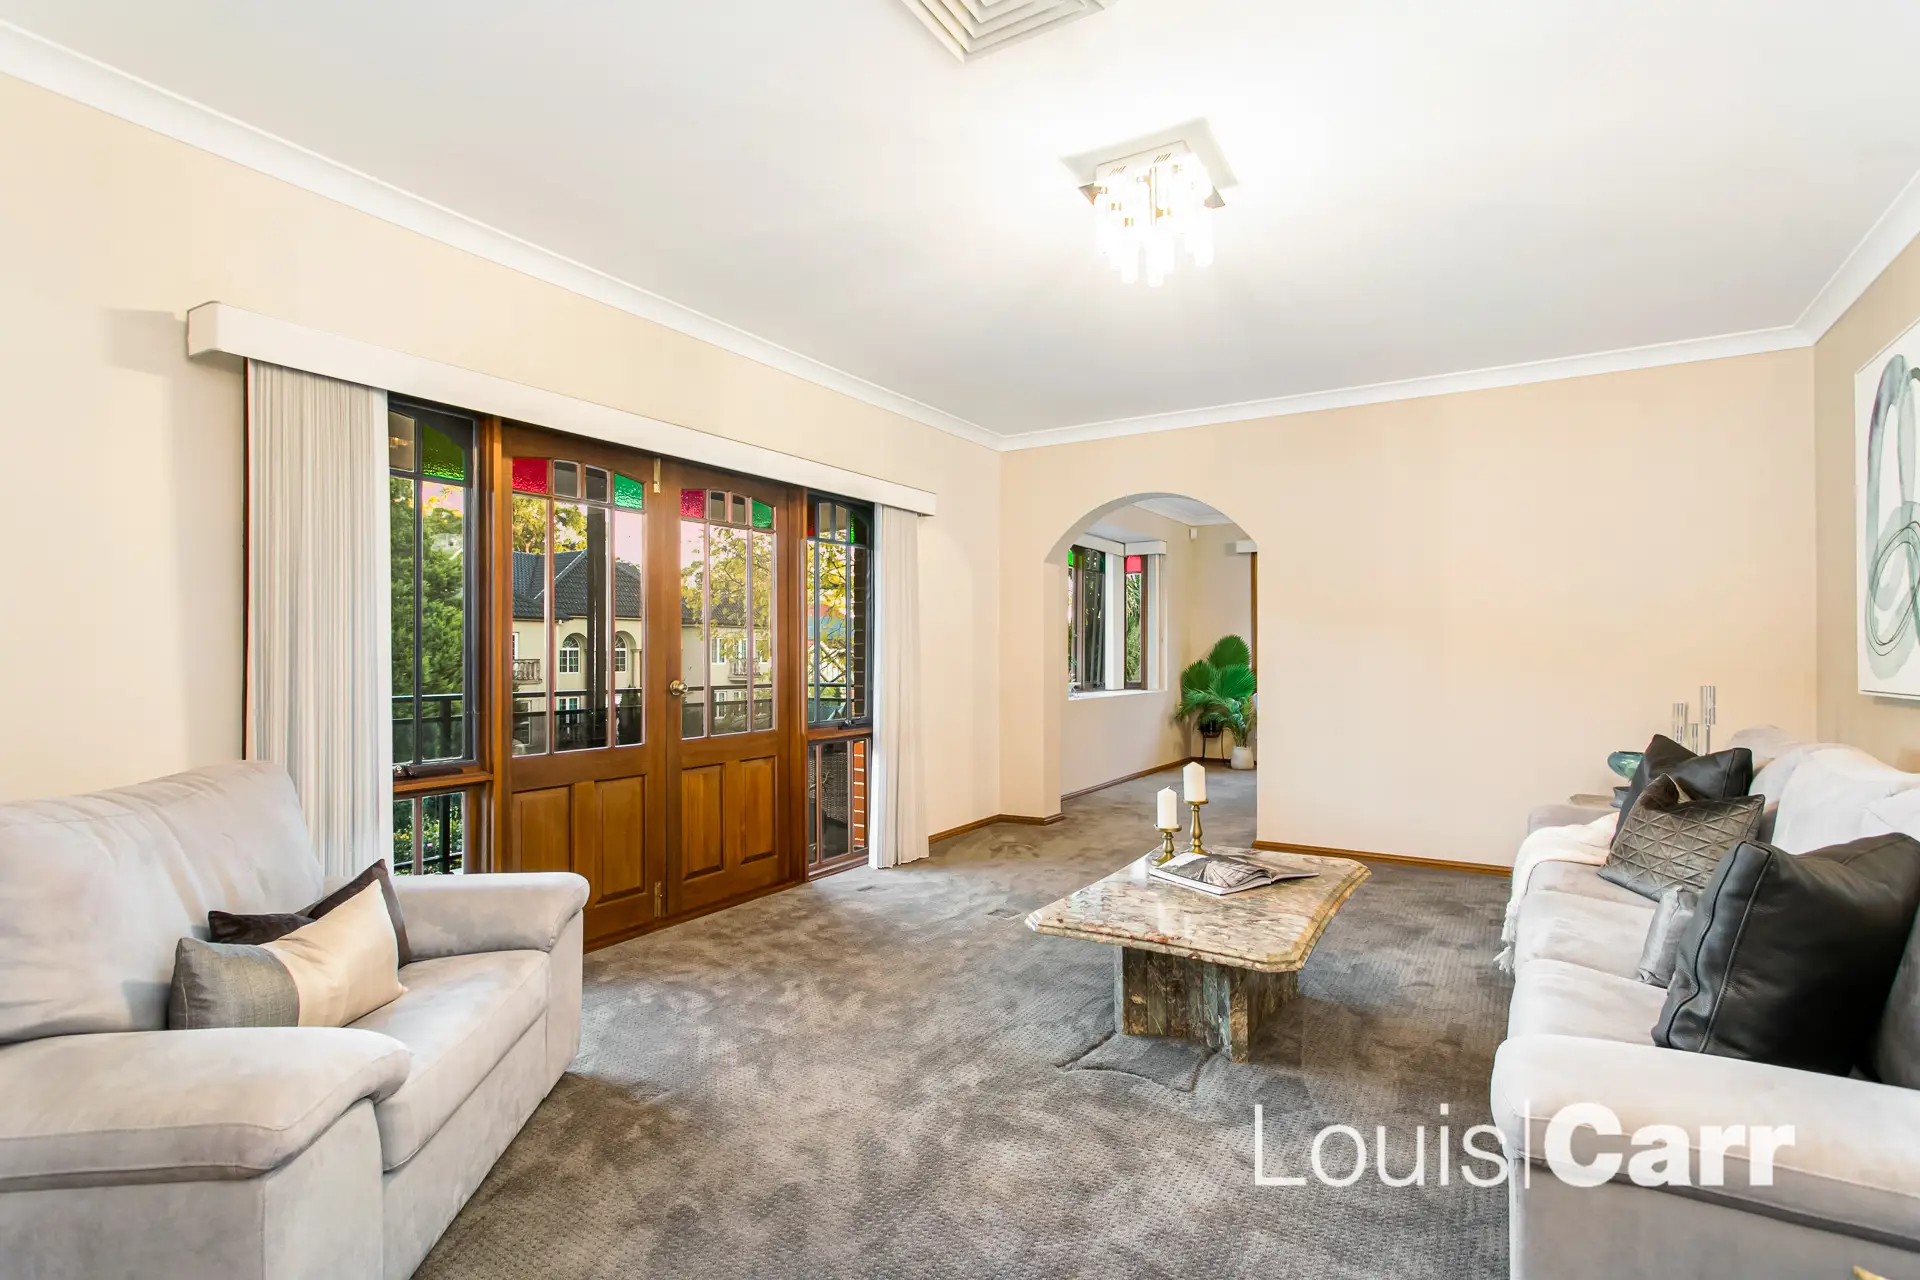 8 Millers Way, West Pennant Hills Sold by Louis Carr Real Estate - image 5